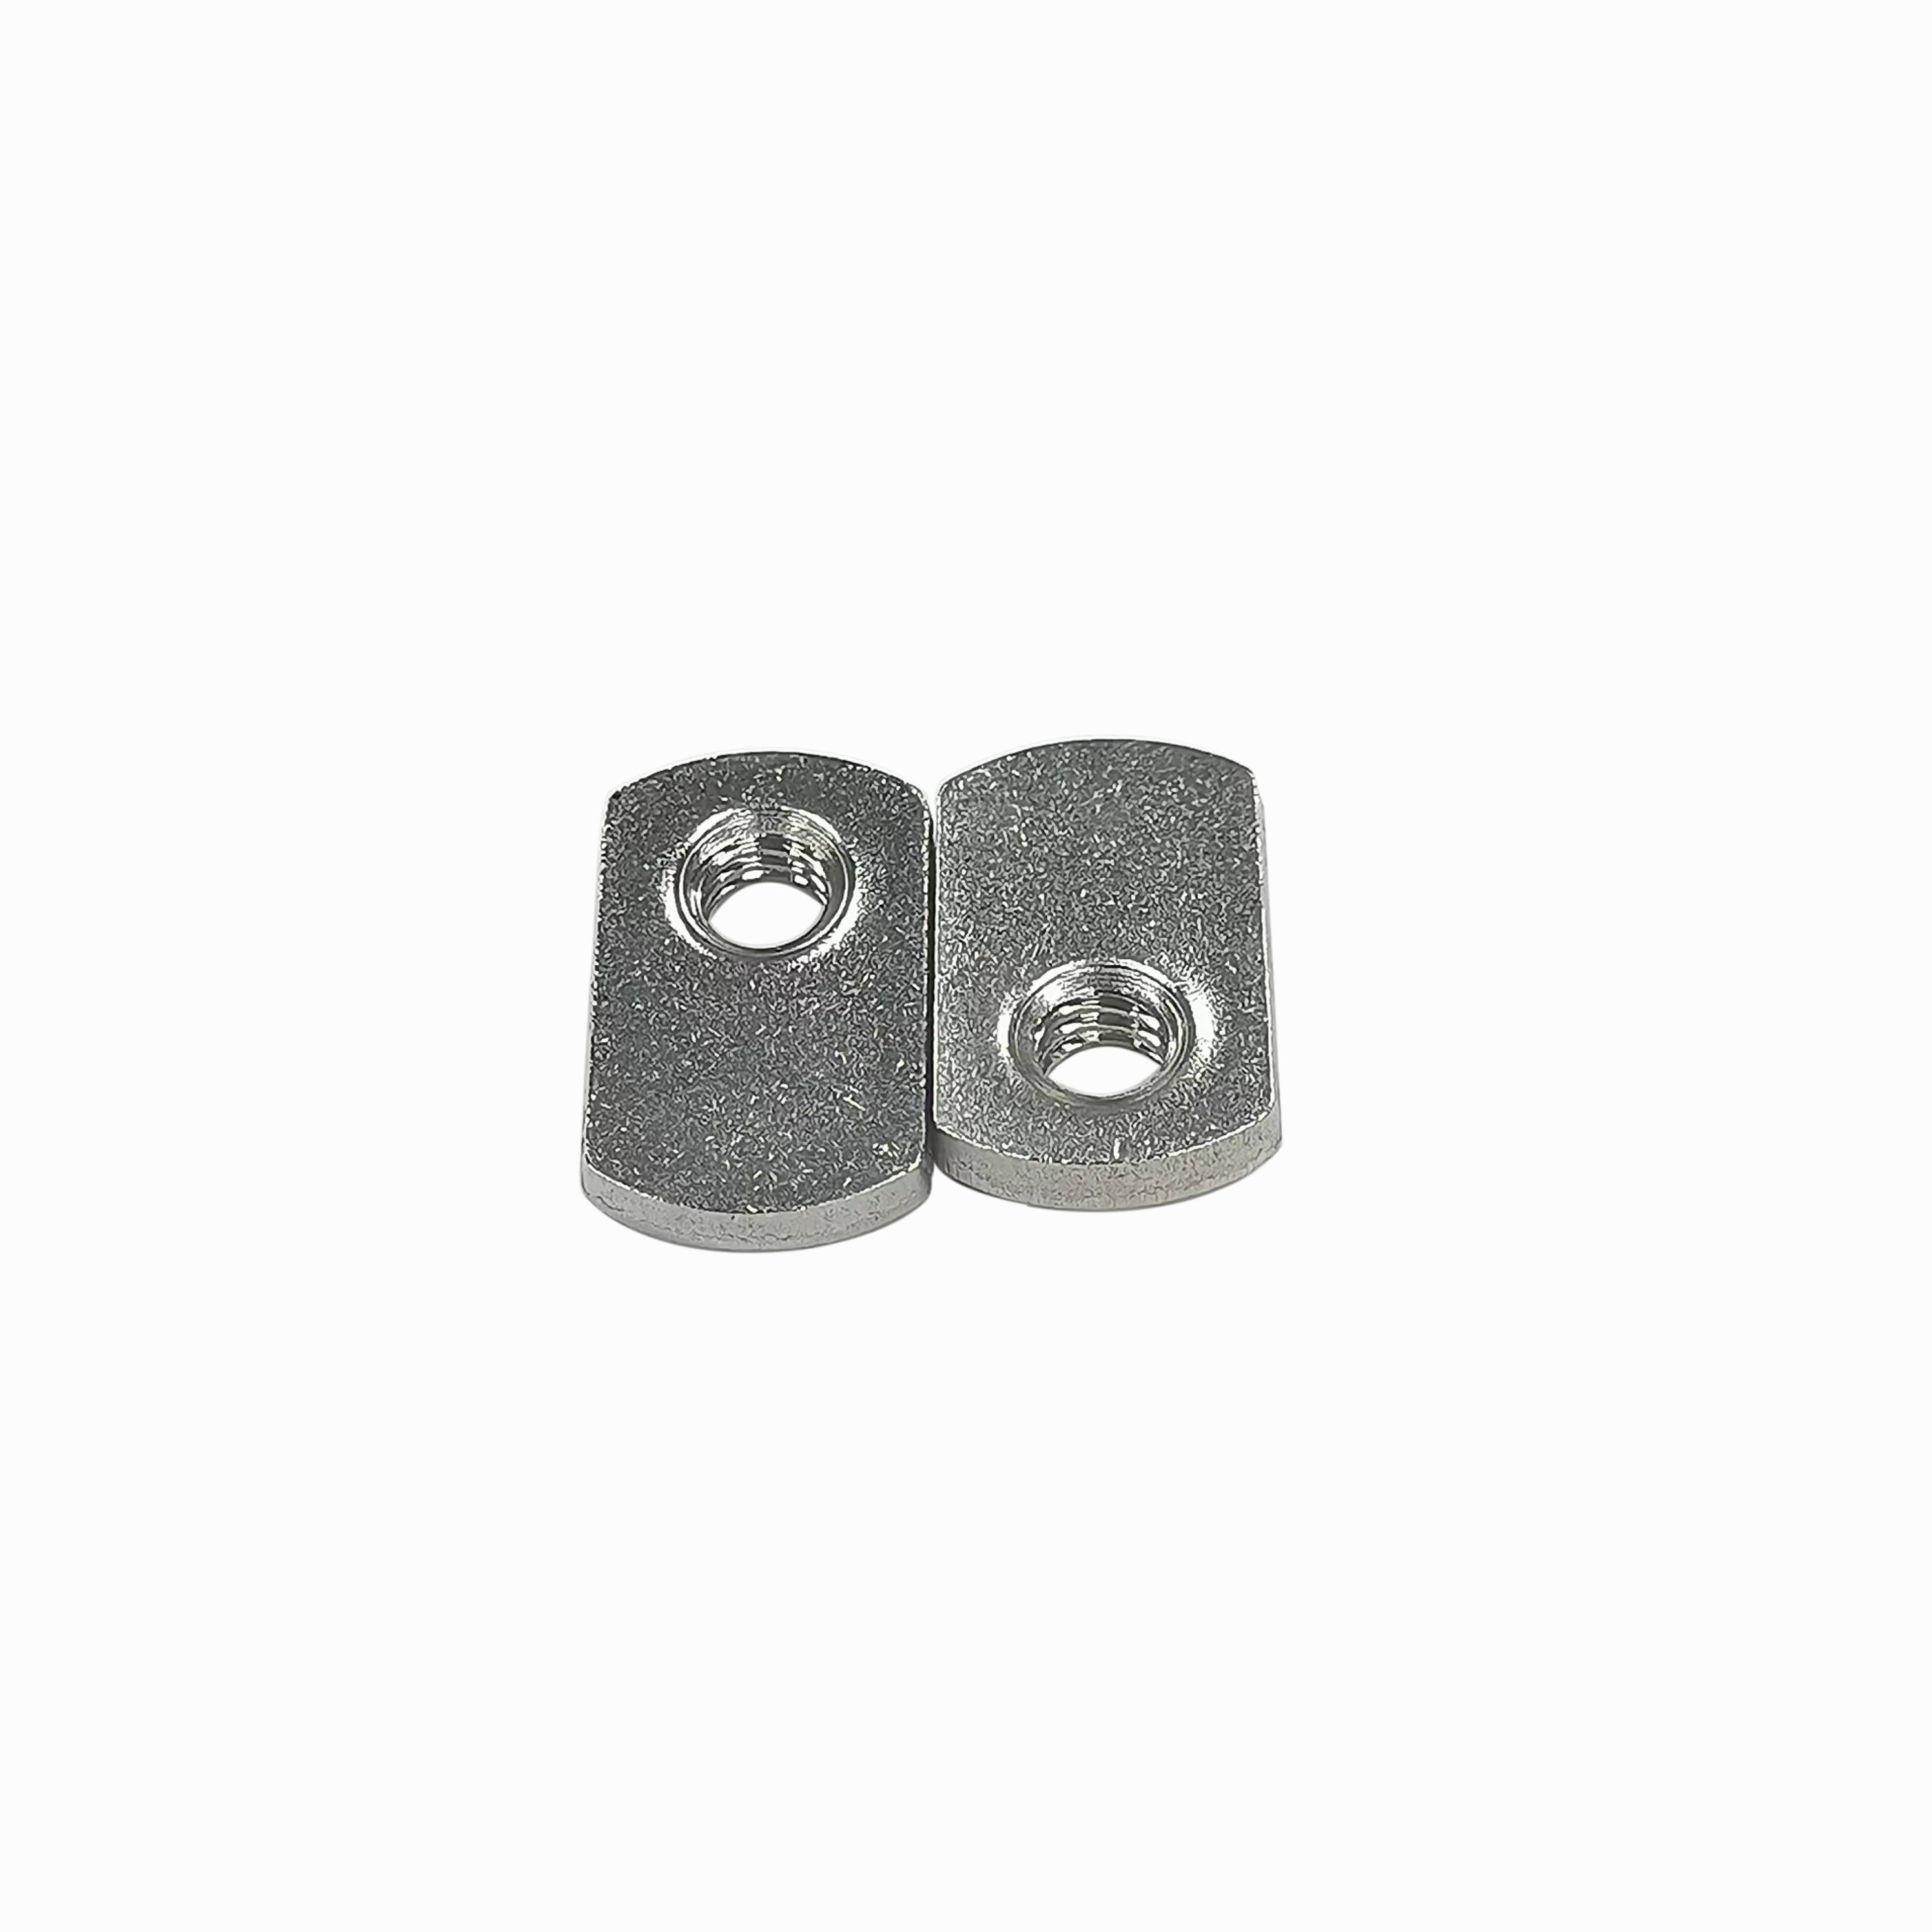 Customized Stainless Steel 302 304 316 Cold Heading Through Hole Plain Kayaking Canoes T Weld Nuts for Slide Rail Guide Track